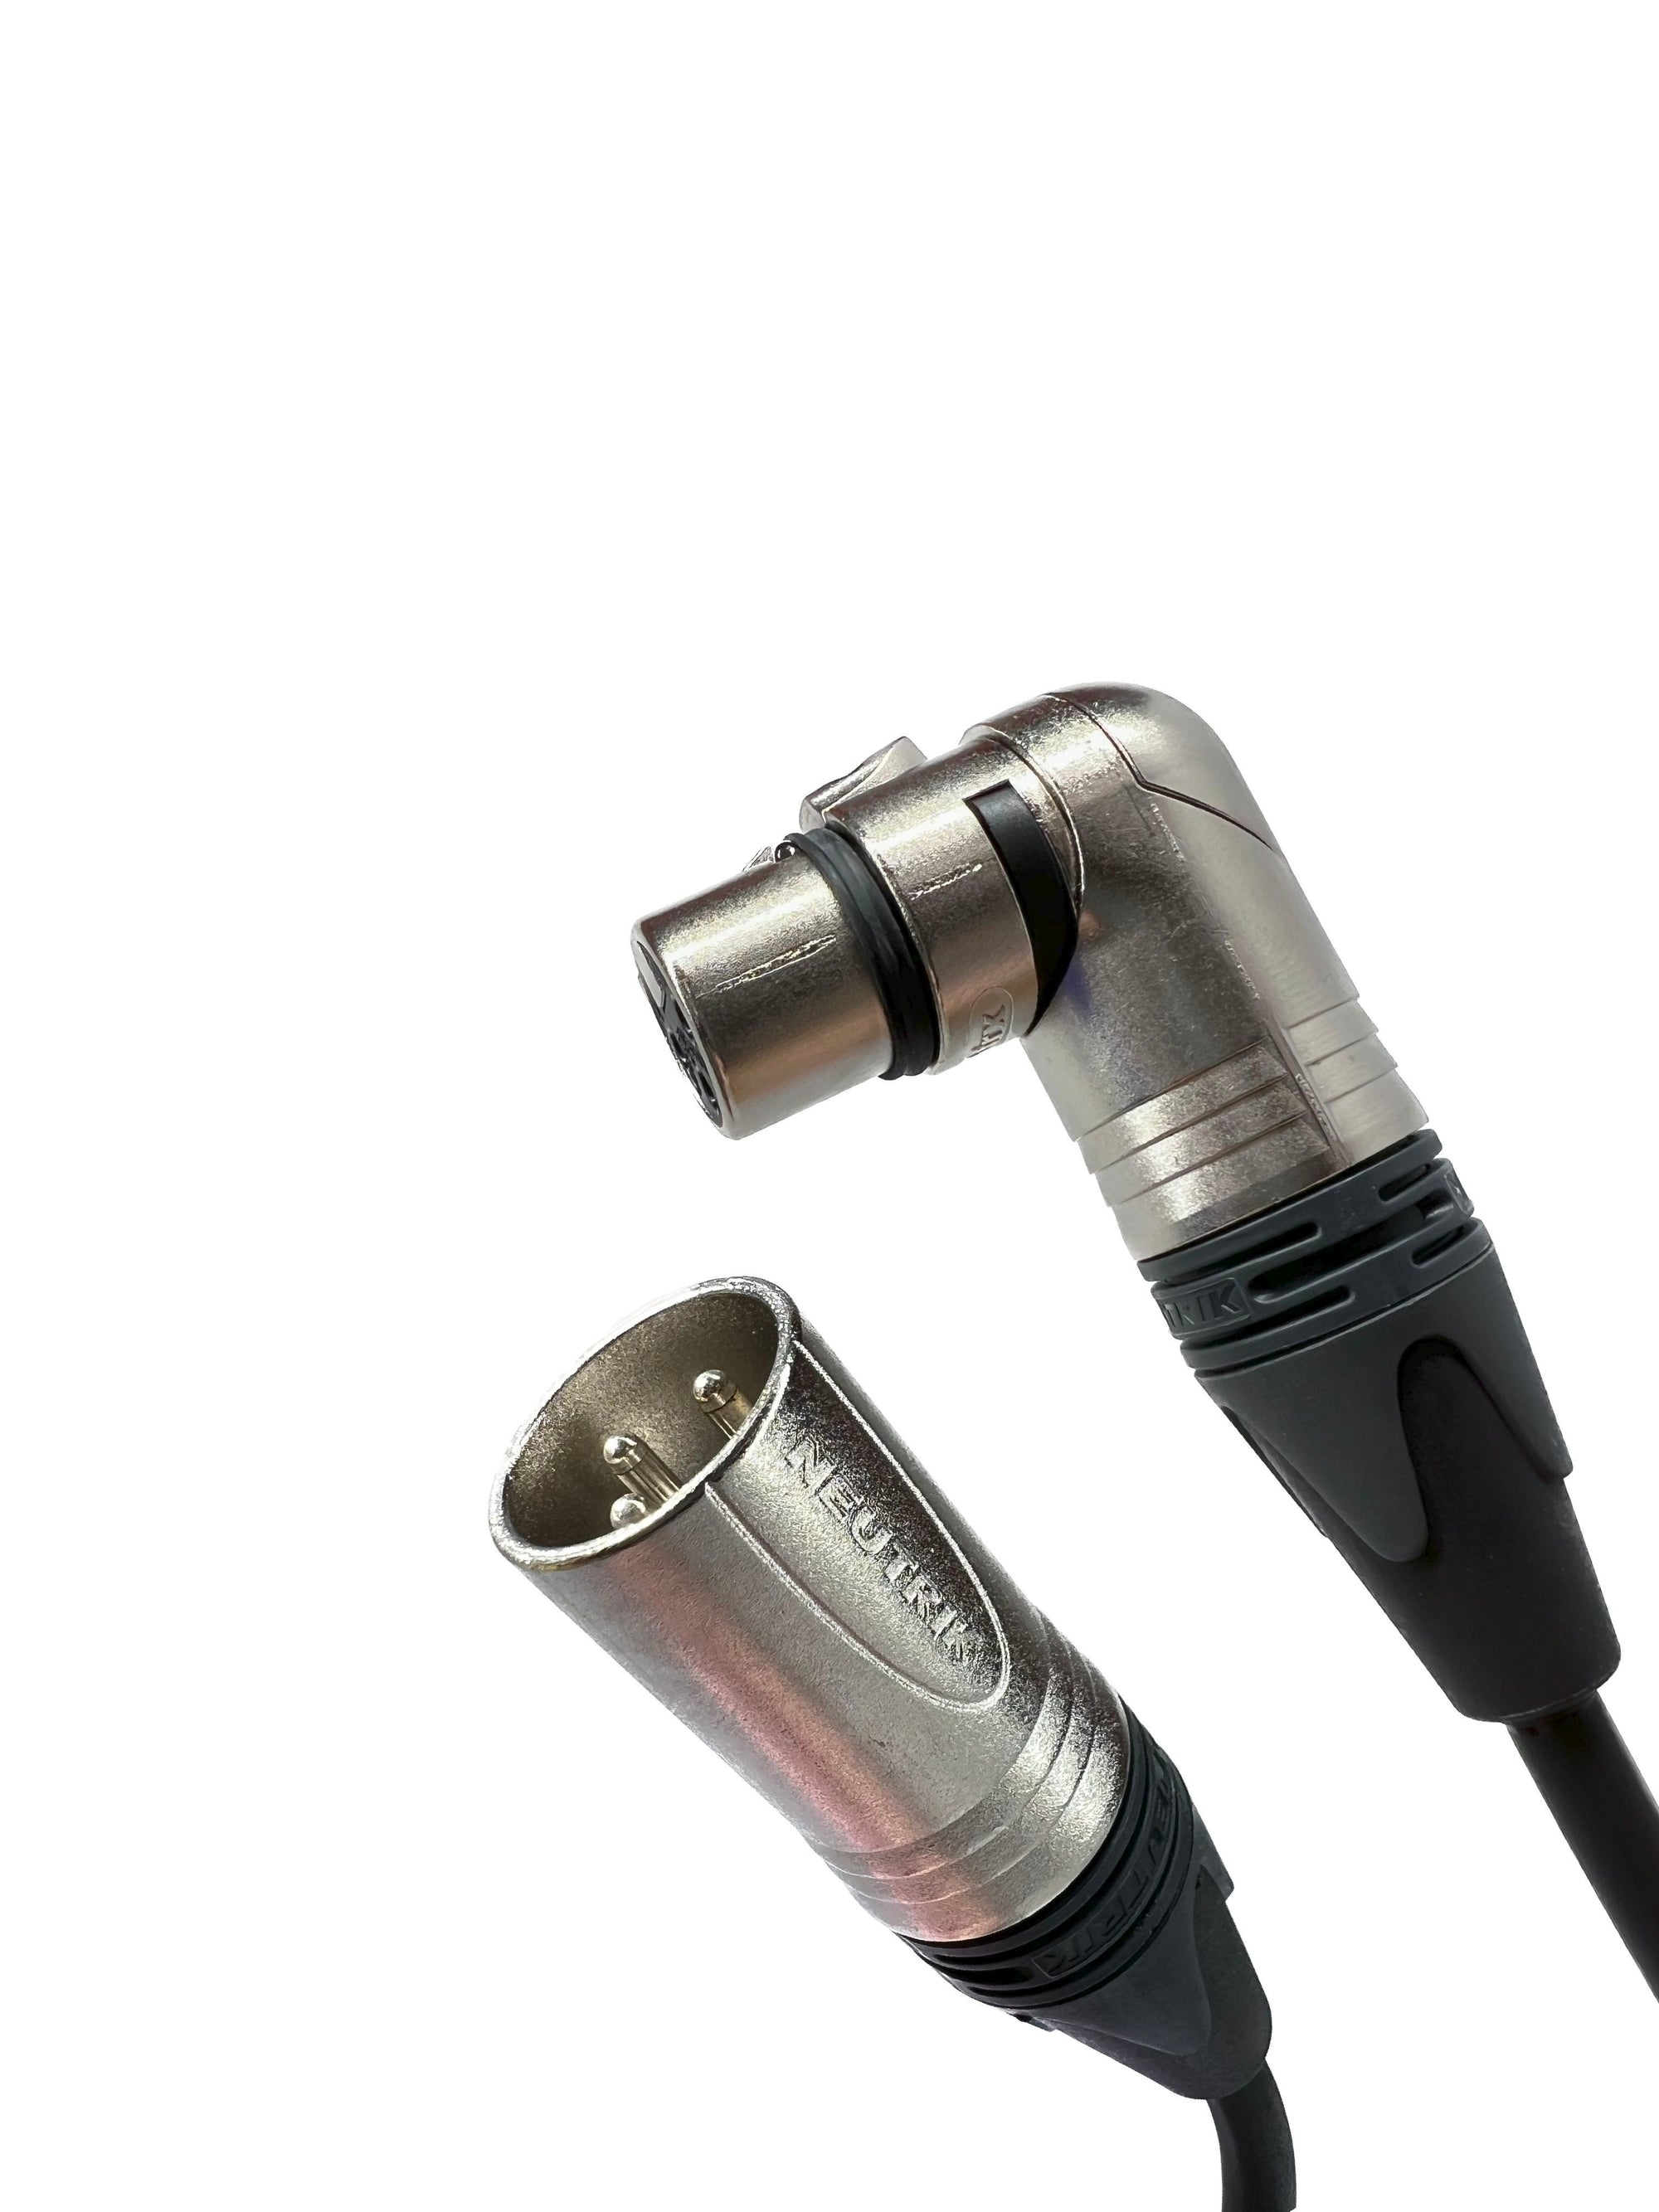 XLR Audio Cable with Female Right Angle to Male Straight Neutrik Connector